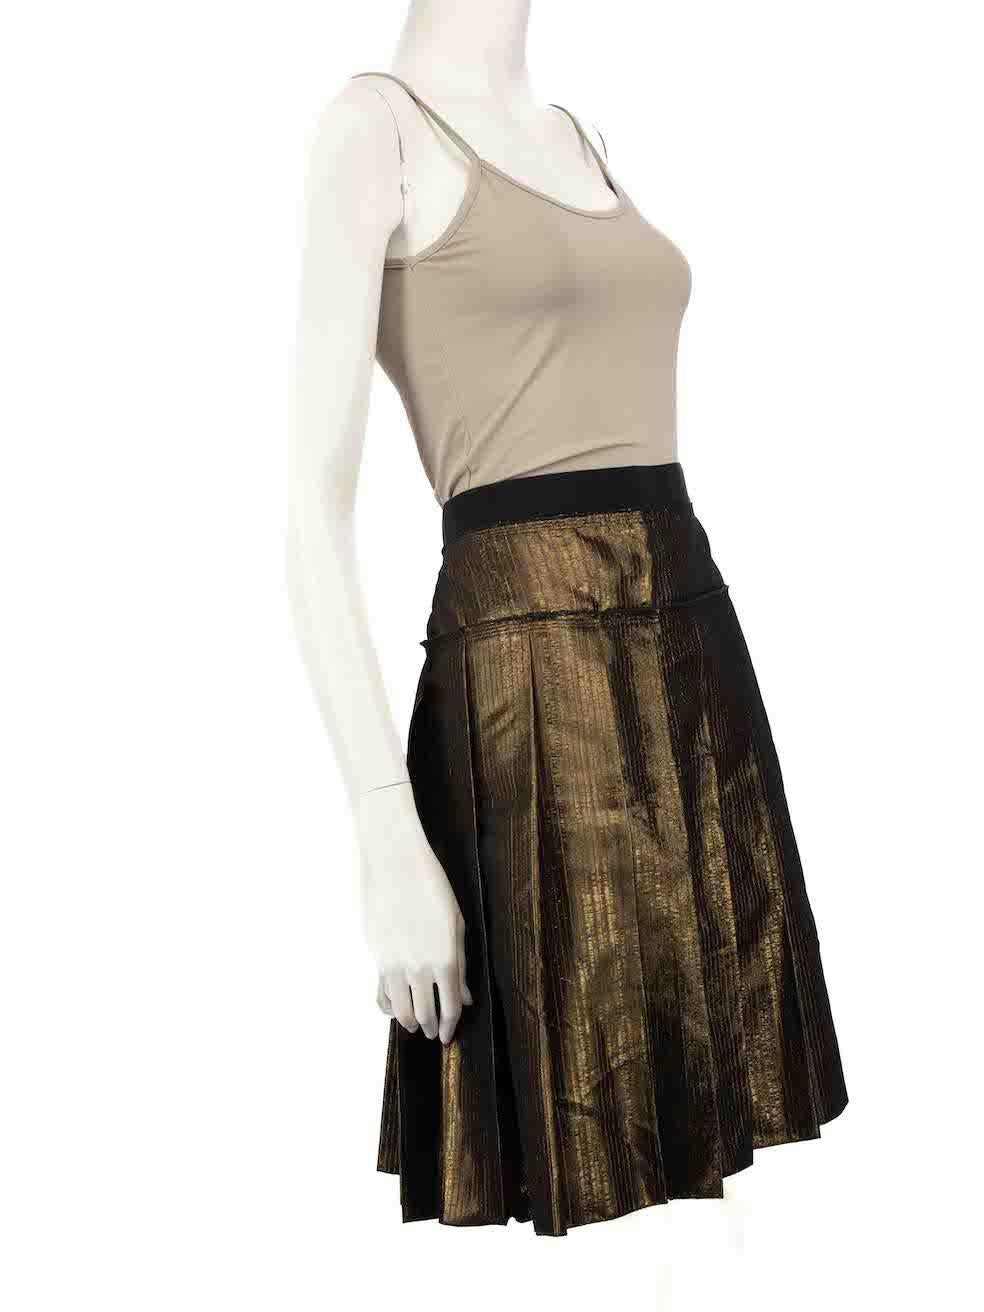 CONDITION is Very good. Hardly any visible wear to skirt is evident on this used D&G designer resale item.
 
 
 
 Details
 
 
 Gold
 
 Synthetic
 
 Skirt
 
 Pleated
 
 Mini
 
 Back zip fastening
 
 
 
 
 
 Made in Italy
 
 
 
 Composition
 
 68%